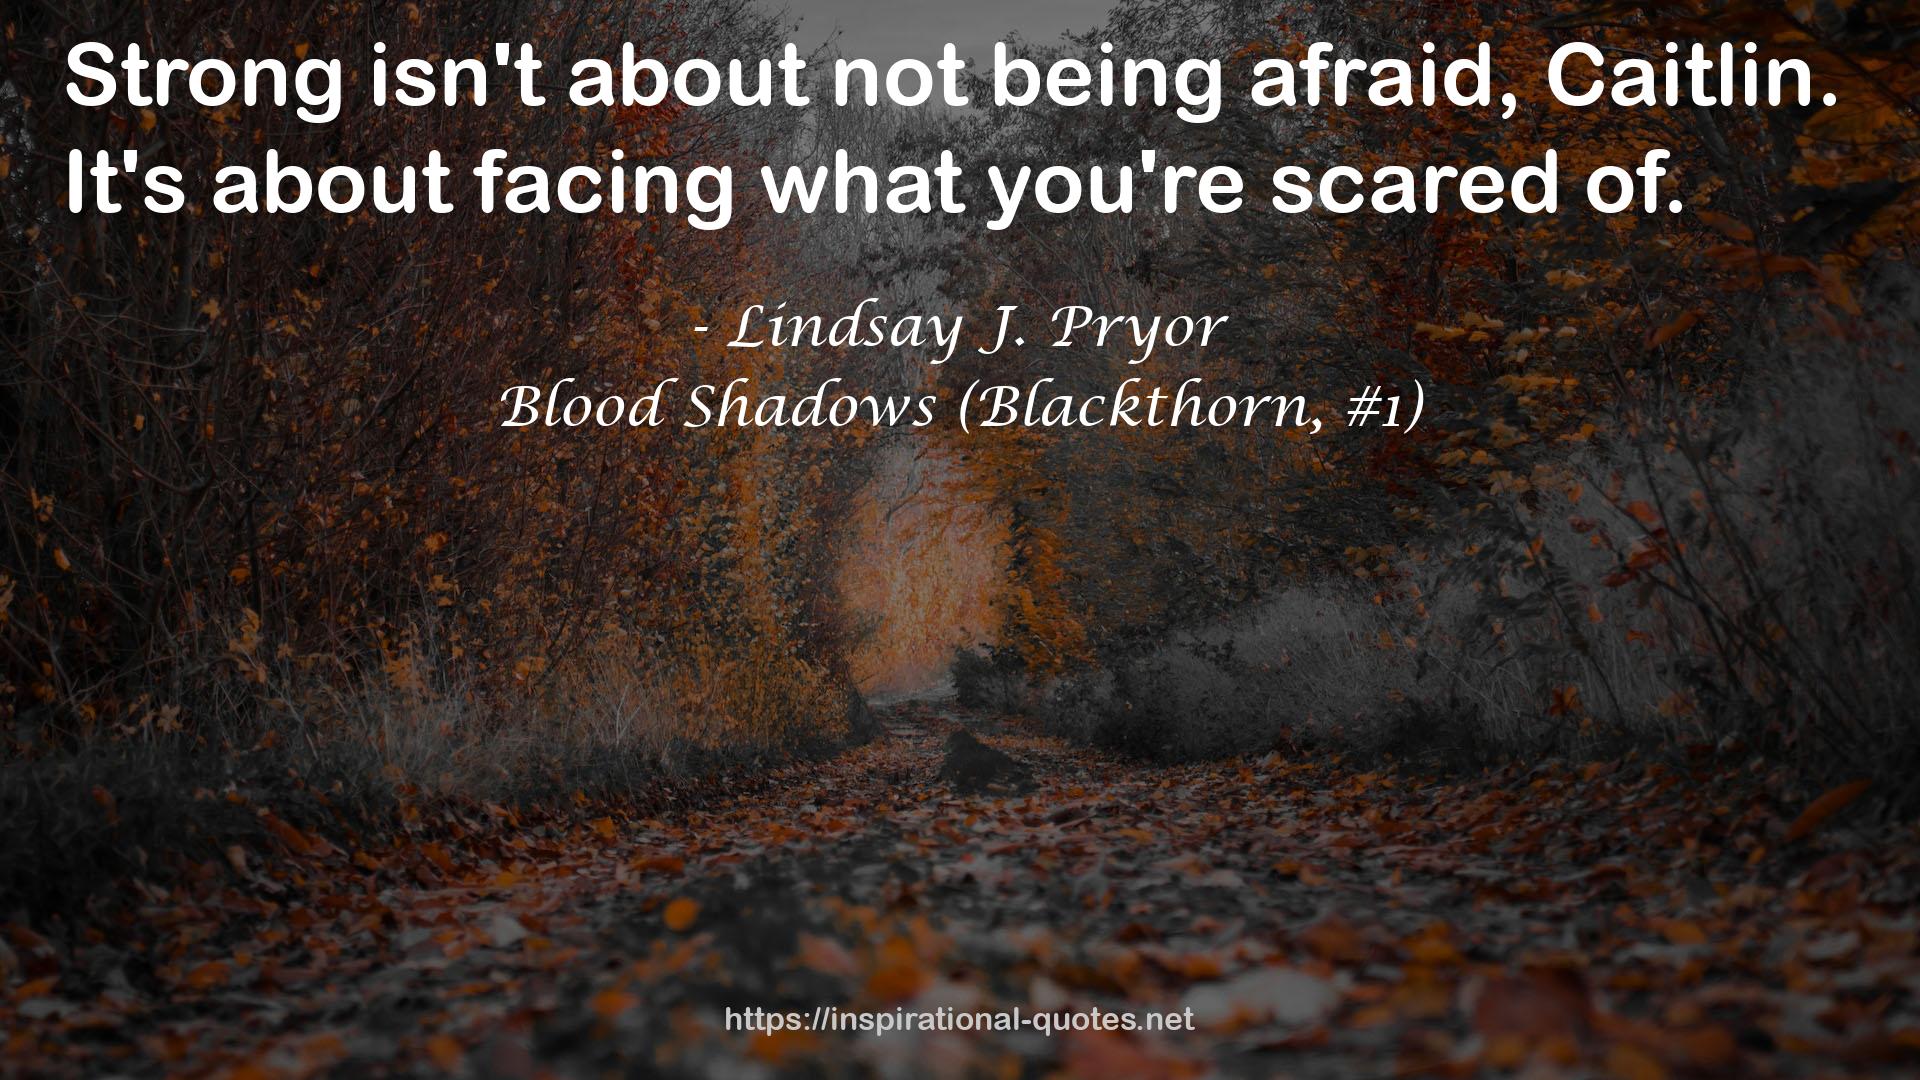 Blood Shadows (Blackthorn, #1) QUOTES